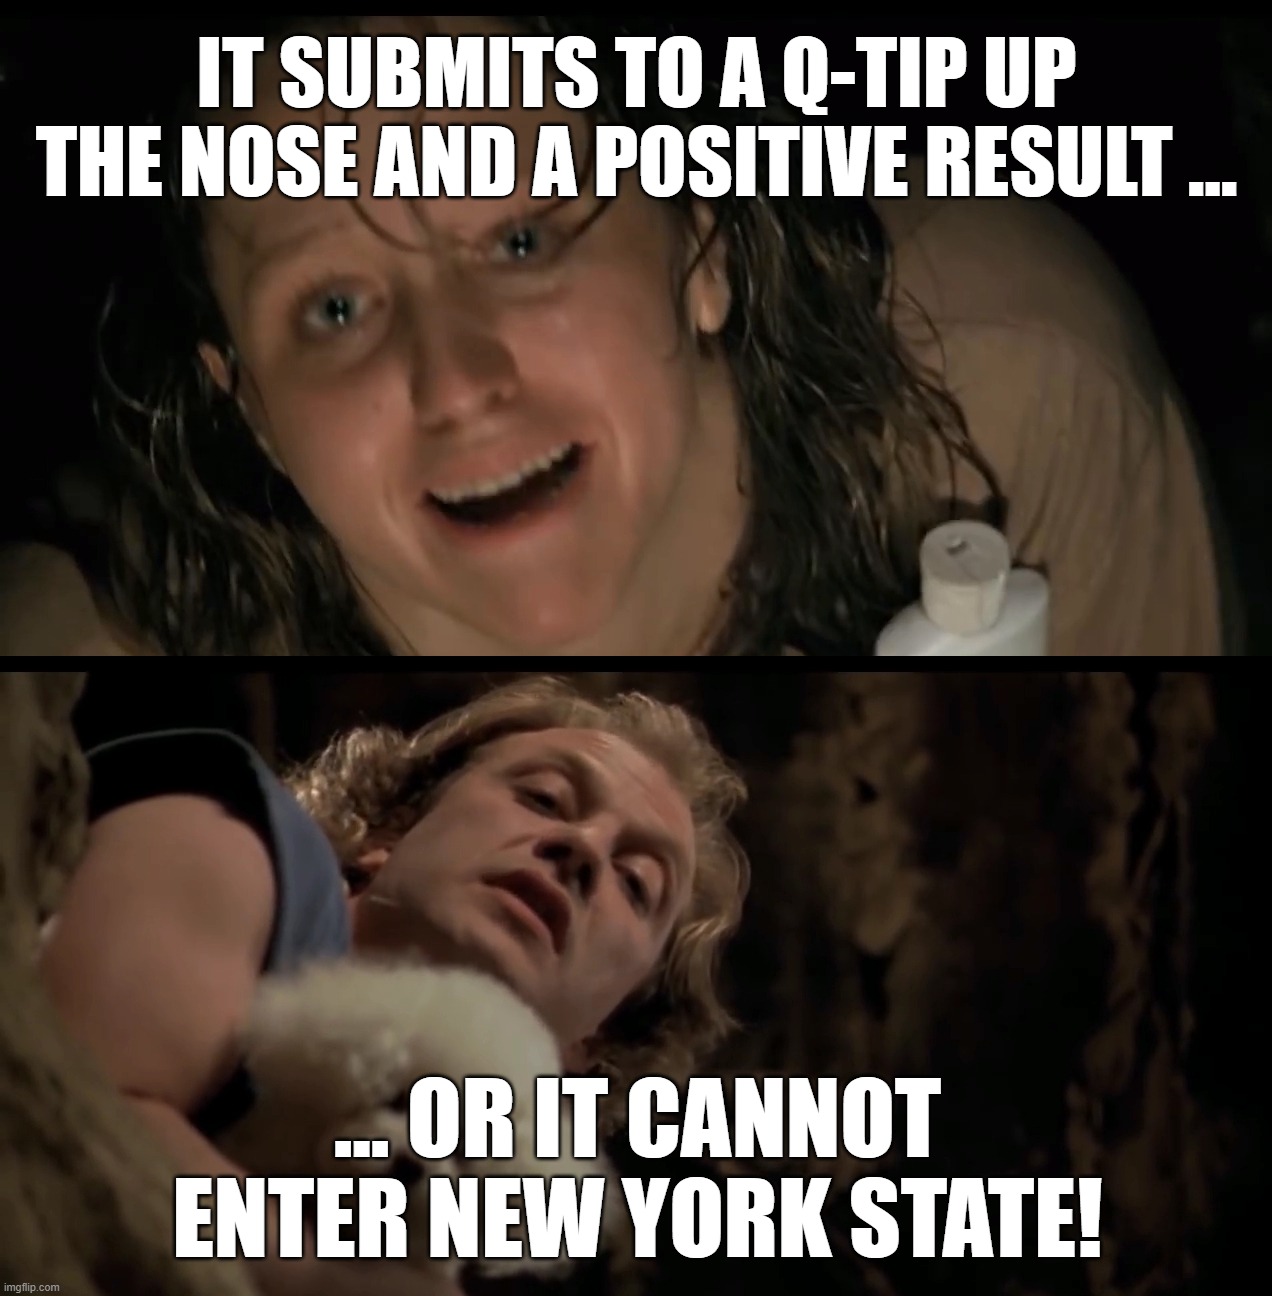 NY COVID INSANITY | IT SUBMITS TO A Q-TIP UP THE NOSE AND A POSITIVE RESULT ... ... OR IT CANNOT ENTER NEW YORK STATE! | image tagged in new york,covid,progressives,insanity | made w/ Imgflip meme maker